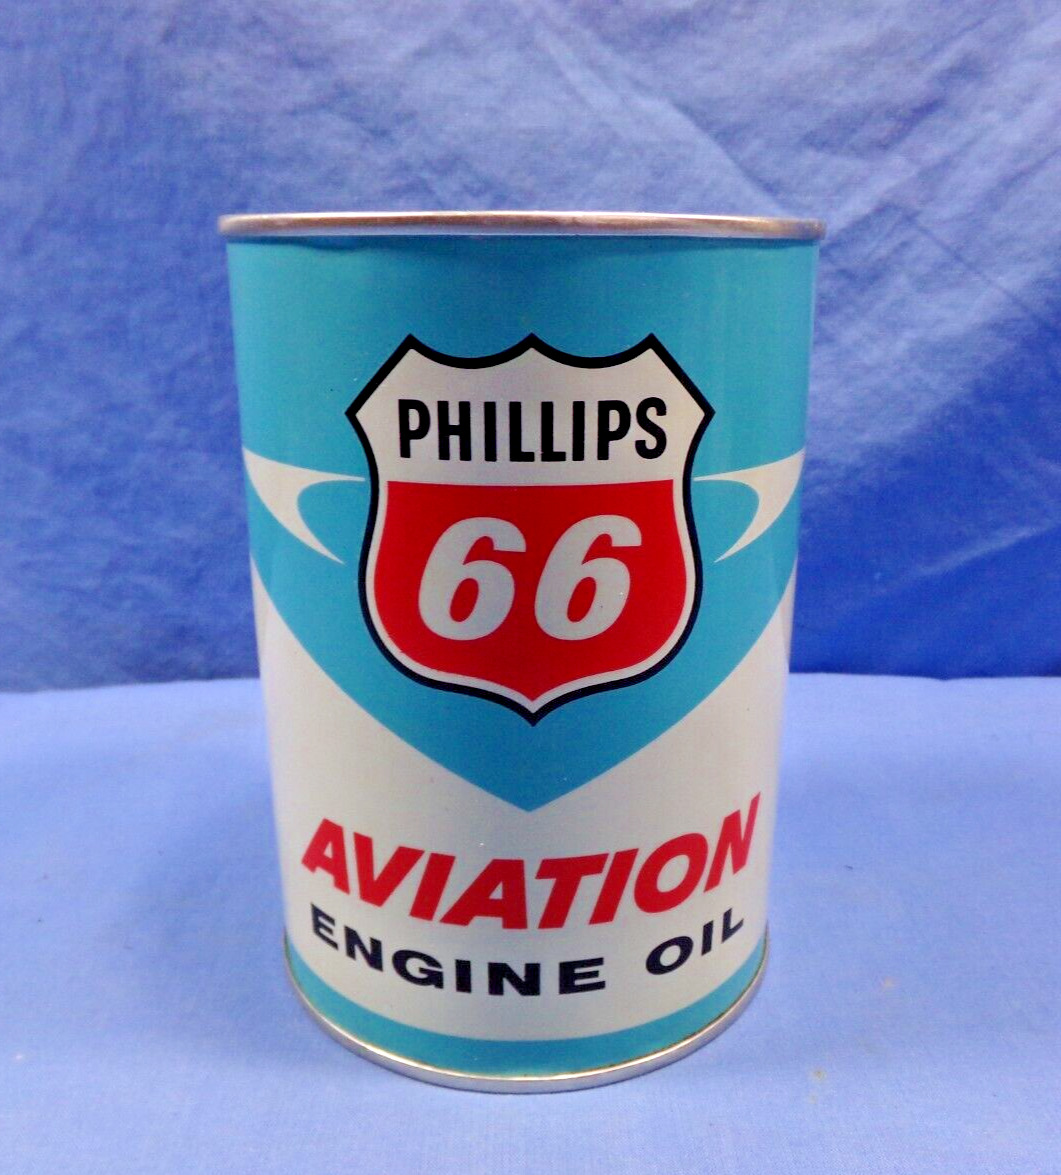 FULL * 1970s era PHILLIPS 66 AVIATION MOTOR OIL 1 qt. Metal Can Excellent Cond.